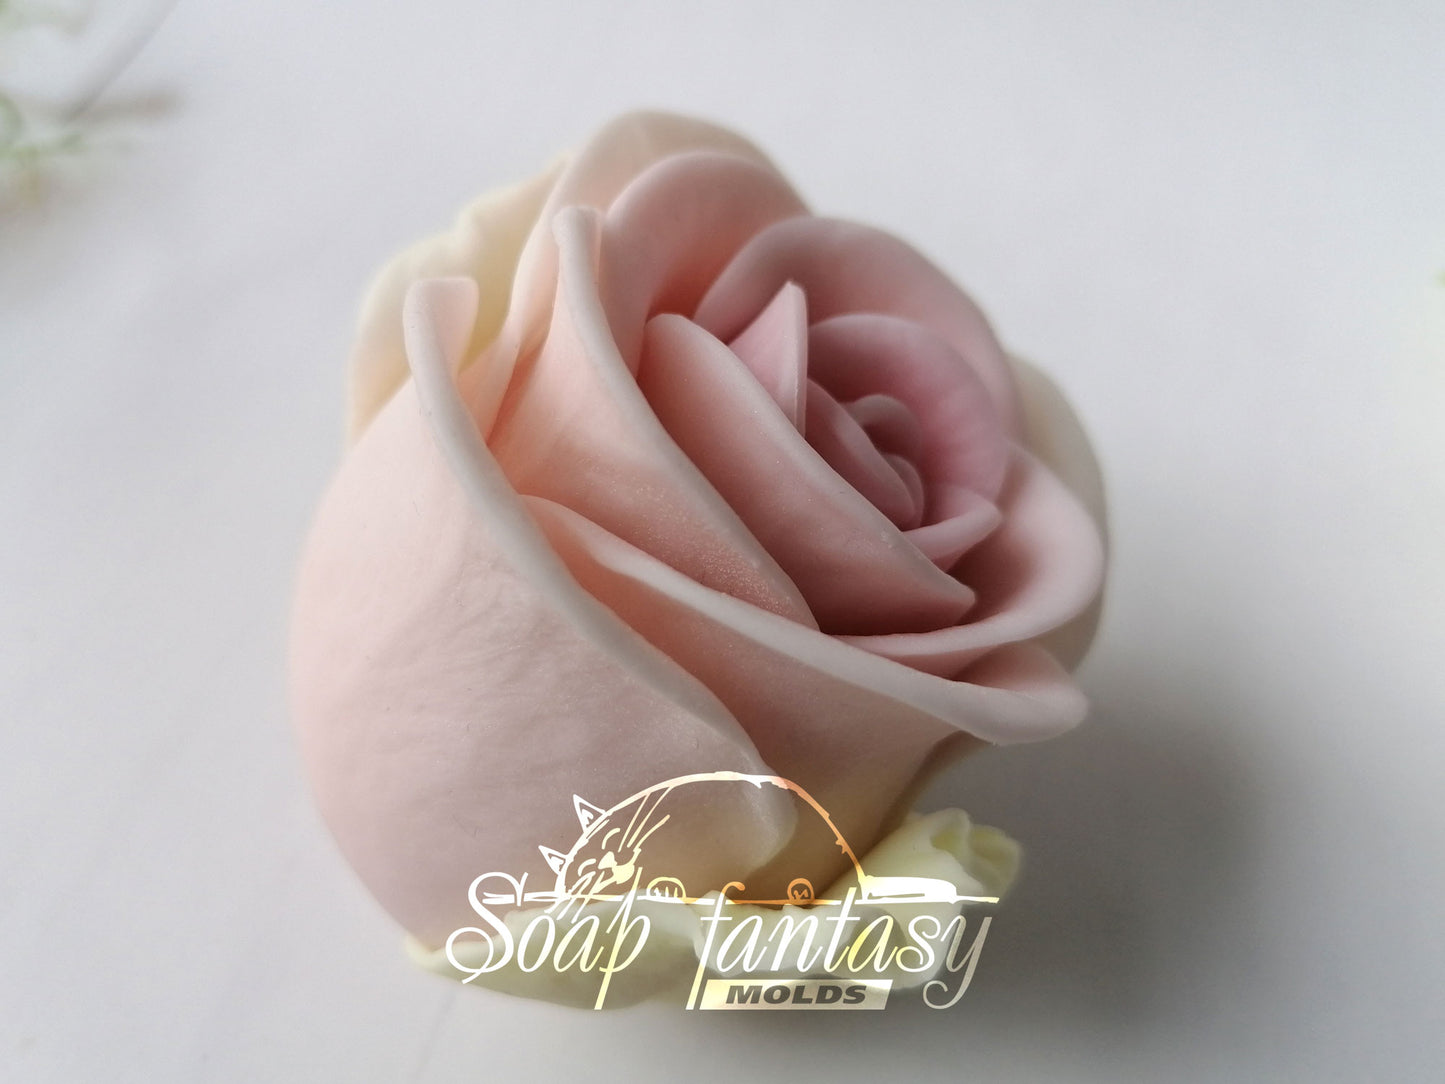 Porcelain rose #5 silicone mold for soap making